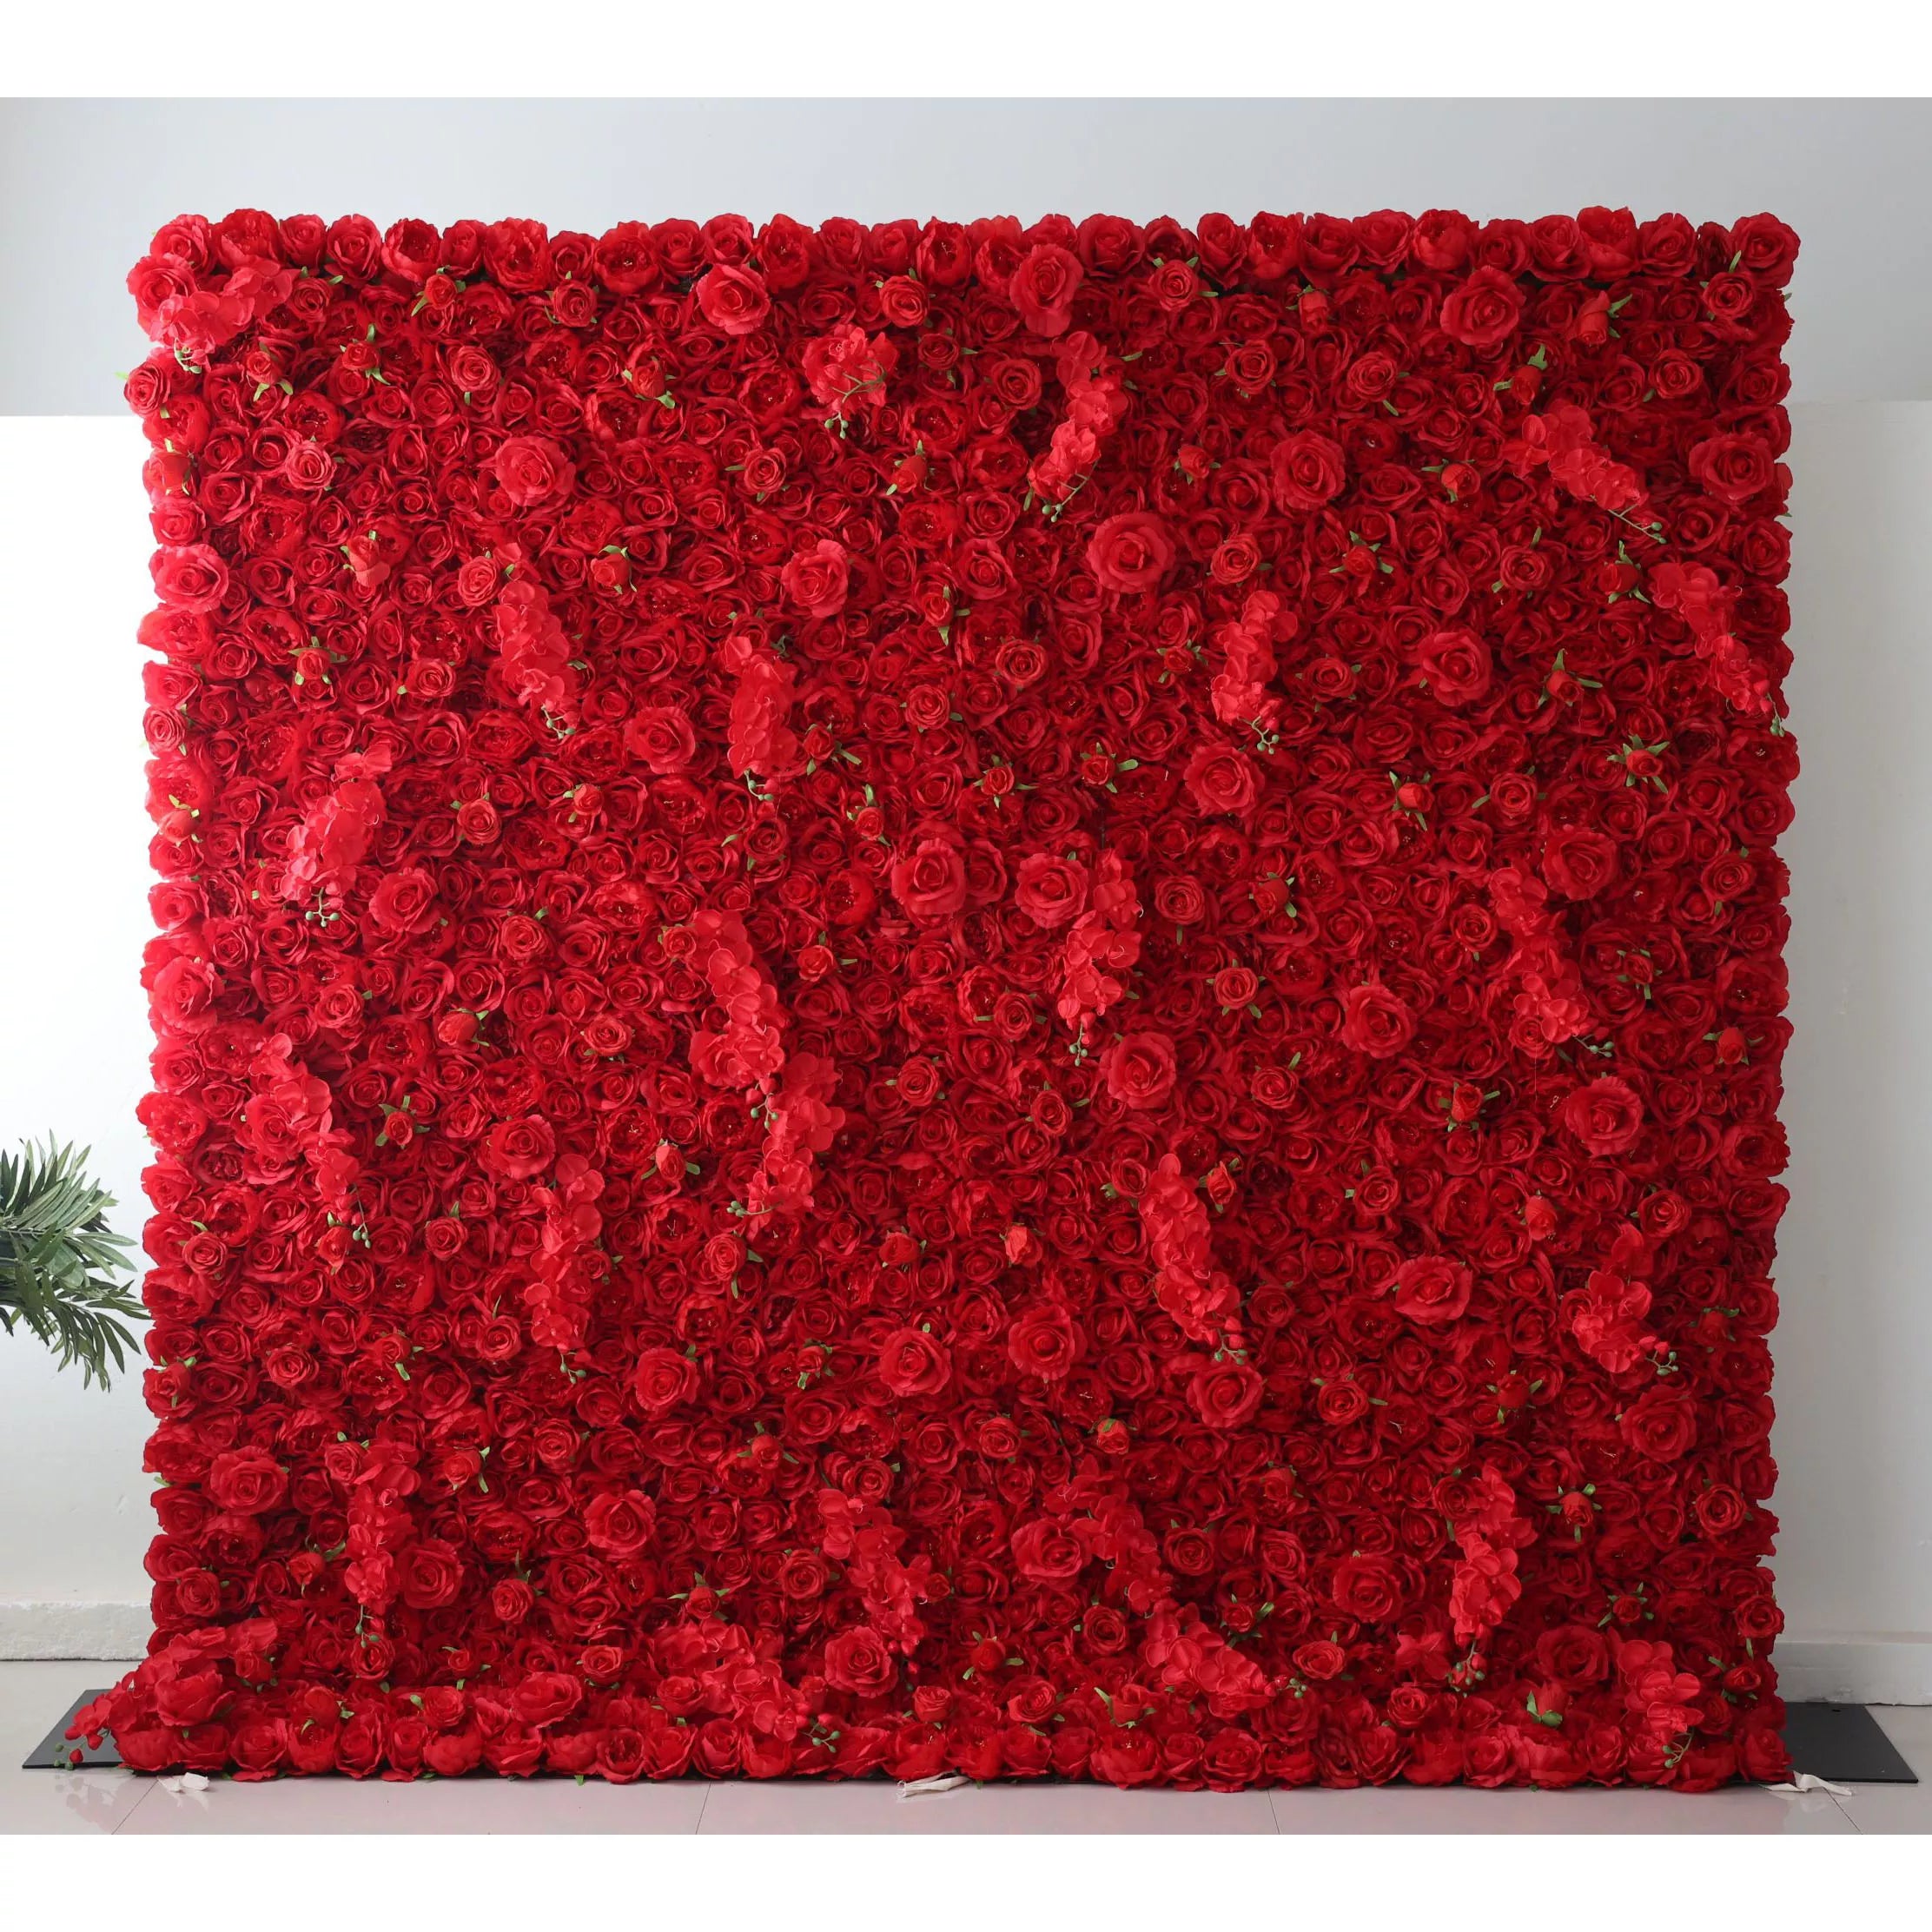 Valar Flowers Roll Up Fabric Artificial Vivid Red Flower Wall Wedding Backdrop, Floral Party Decor, Event Photography-VF-050